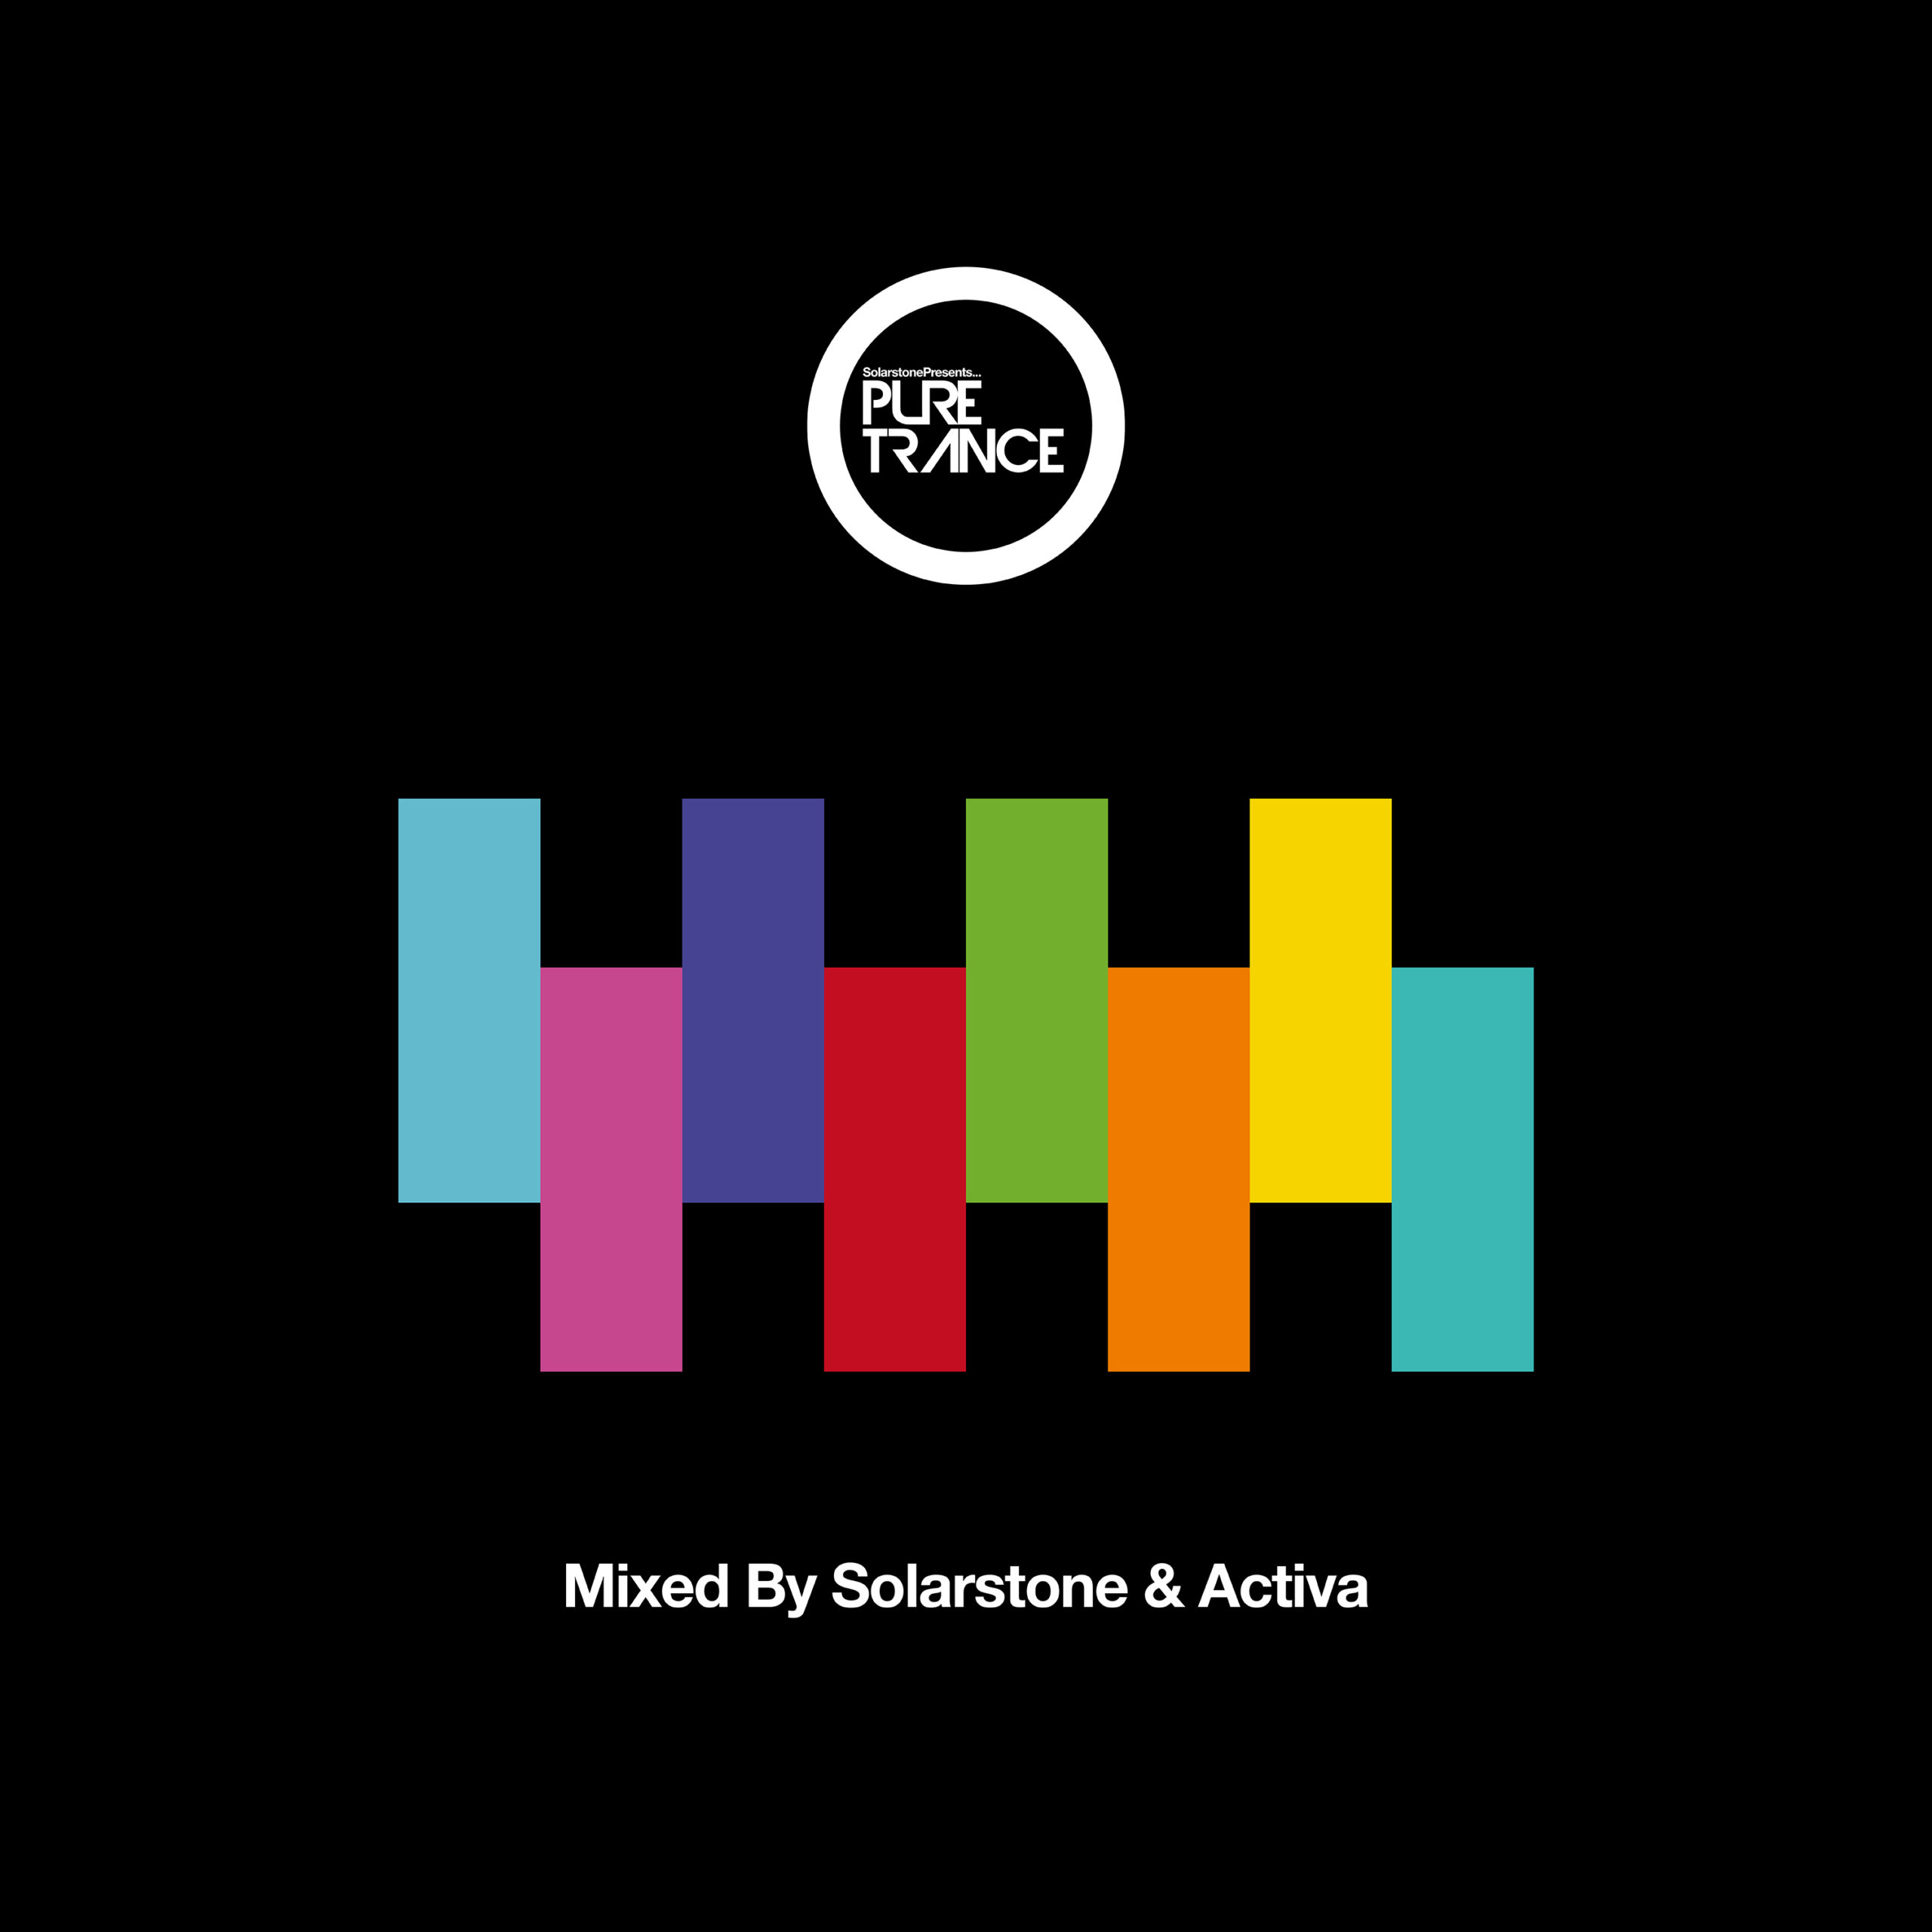 Solarstone presents Pure Trance volume 8 mixed by Solarstone & Activa on Black Hole Recordings